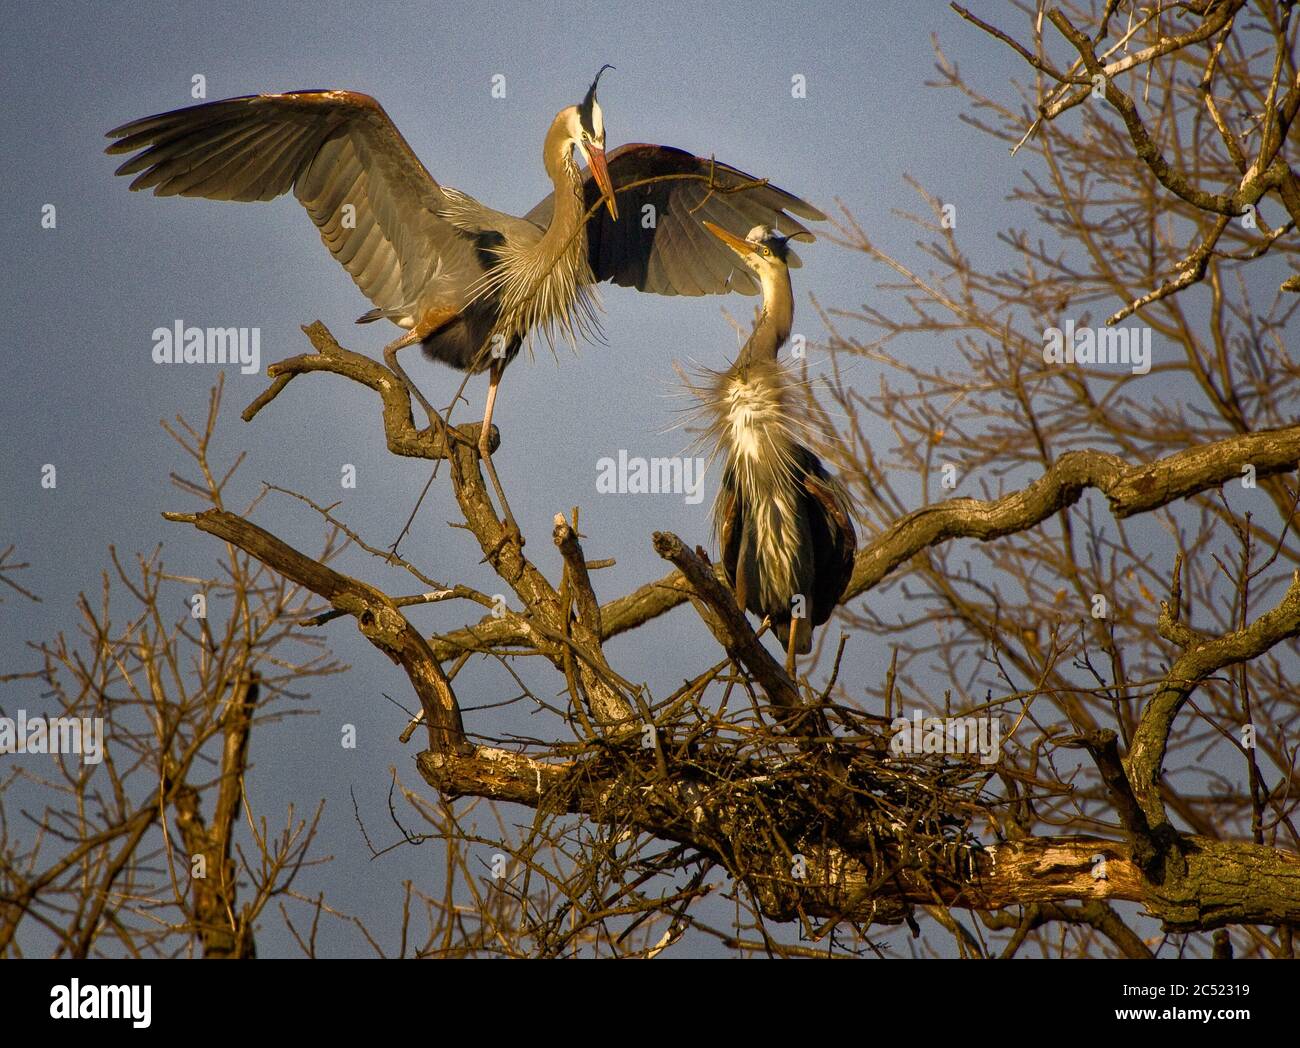 Animal parent behavior with Great Blue Herons (Ardea herodias) nest building and courtship ritual at a heron rookery in Milford, Michigan, USA Stock Photo